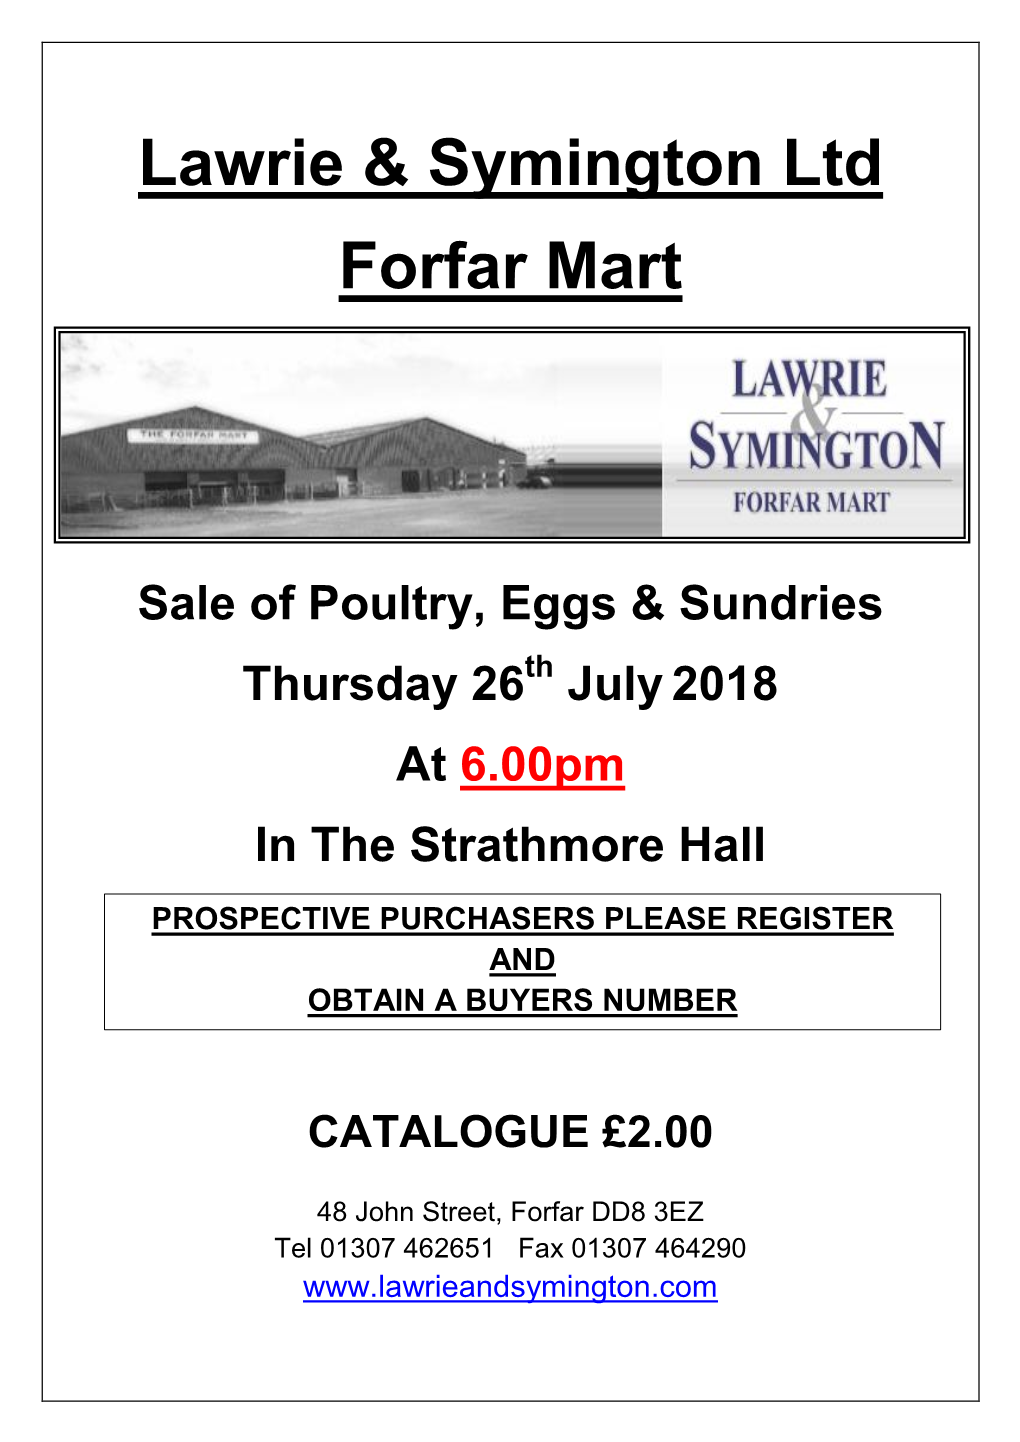 Poultry, Eggs & Sundries Thursday 26Th July 2018 at 6.00Pm in the Strathmore Hall PROSPECTIVE PURCHASERS PLEASE REGISTER and OBTAIN a BUYERS NUMBER